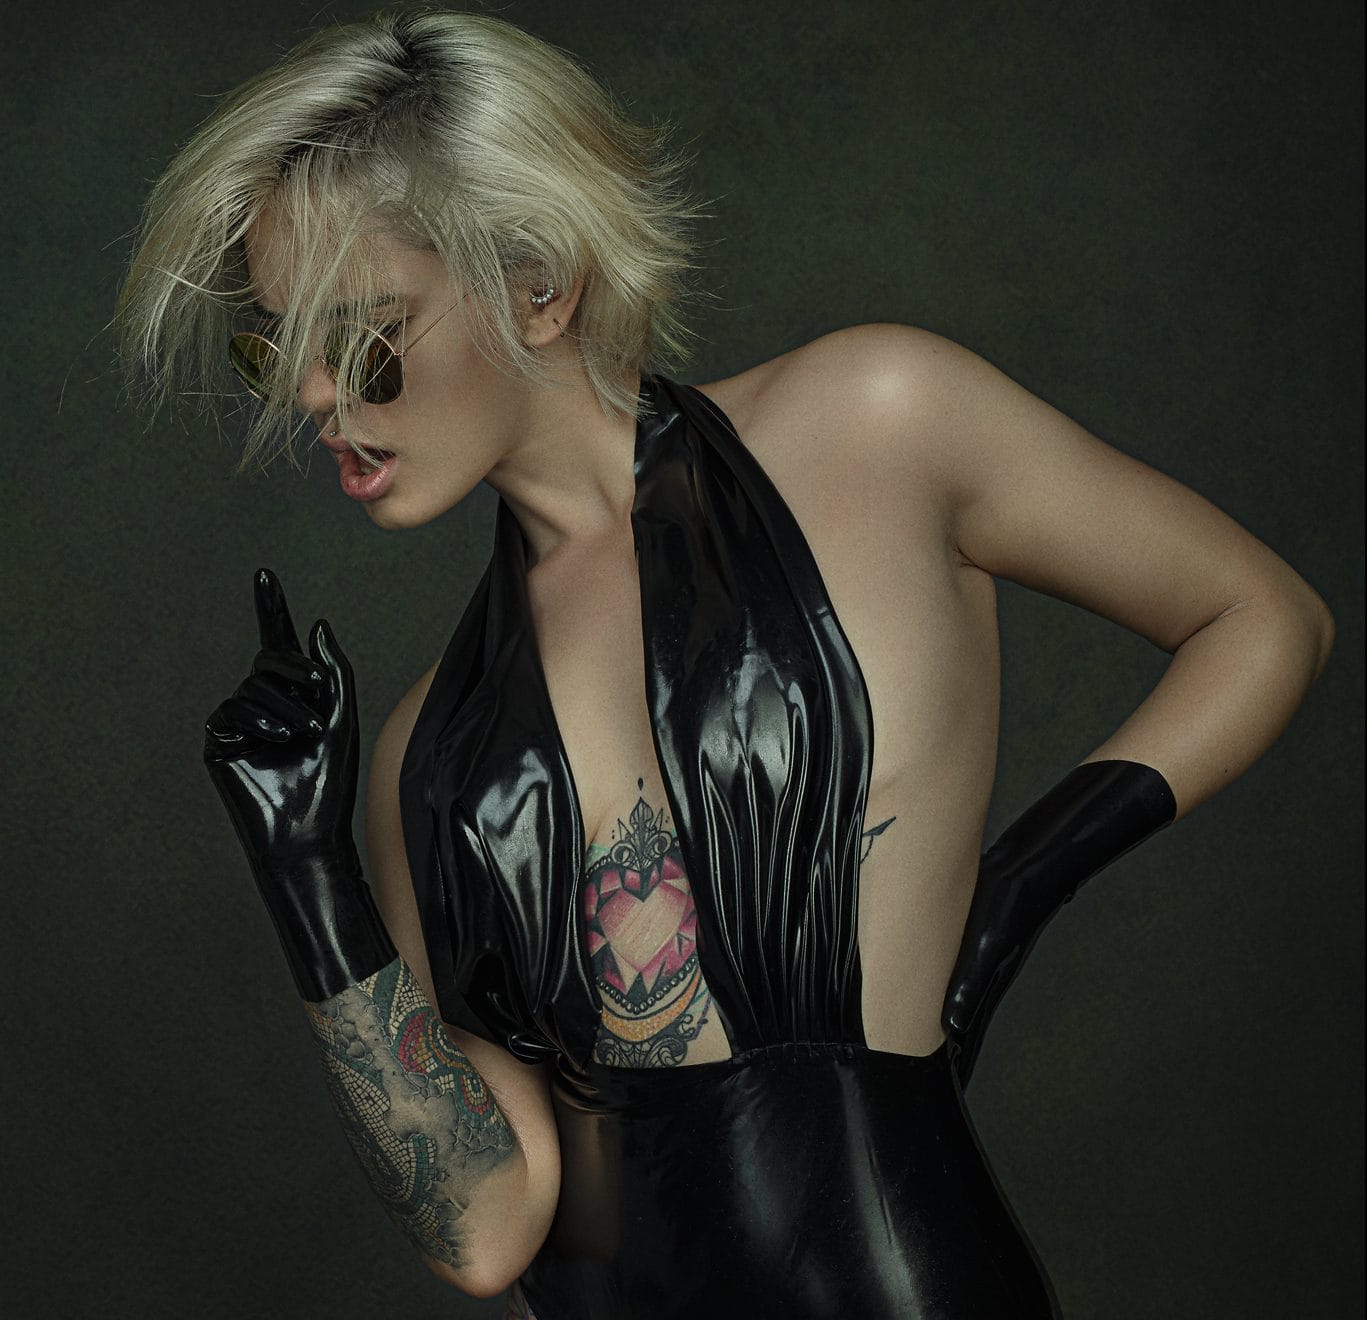 Photo by Claudio Salviano, wearing Shhh! Couture Latex